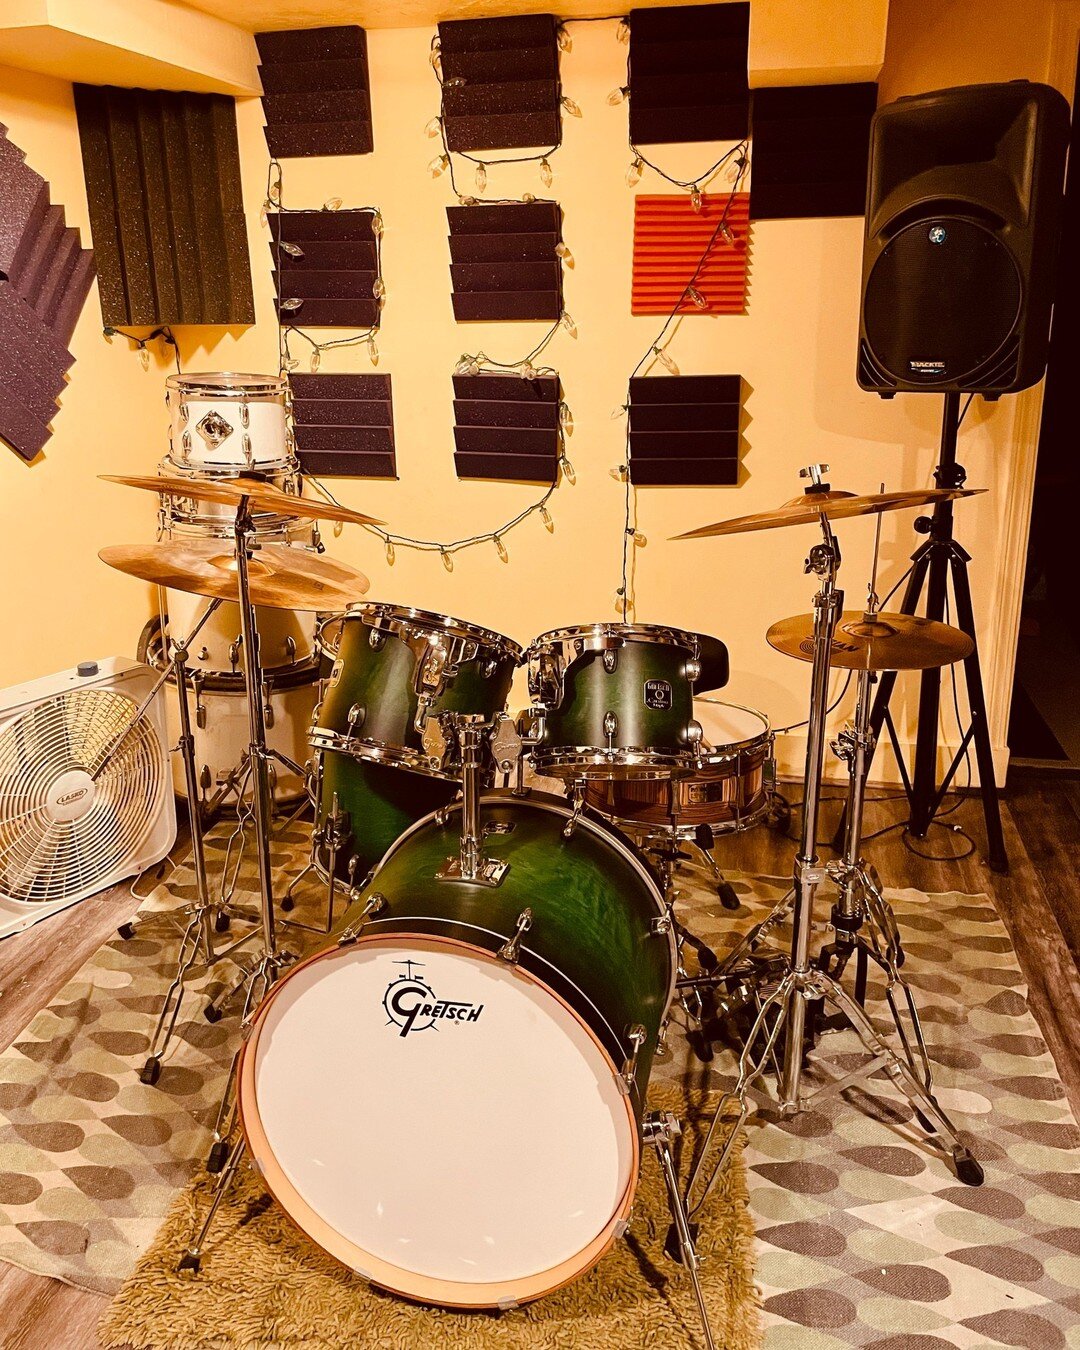 Who's ready to make some beats? We have a brand new house kit!  It&rsquo;s an amazing DW Kit waiting on you! This kit is available for use for both Rehearsals and Recording! 🎶 🥁 🎛 

#MyLadyOnFire #recordingstudio #rehearsalspace #Boston #NewEnglan